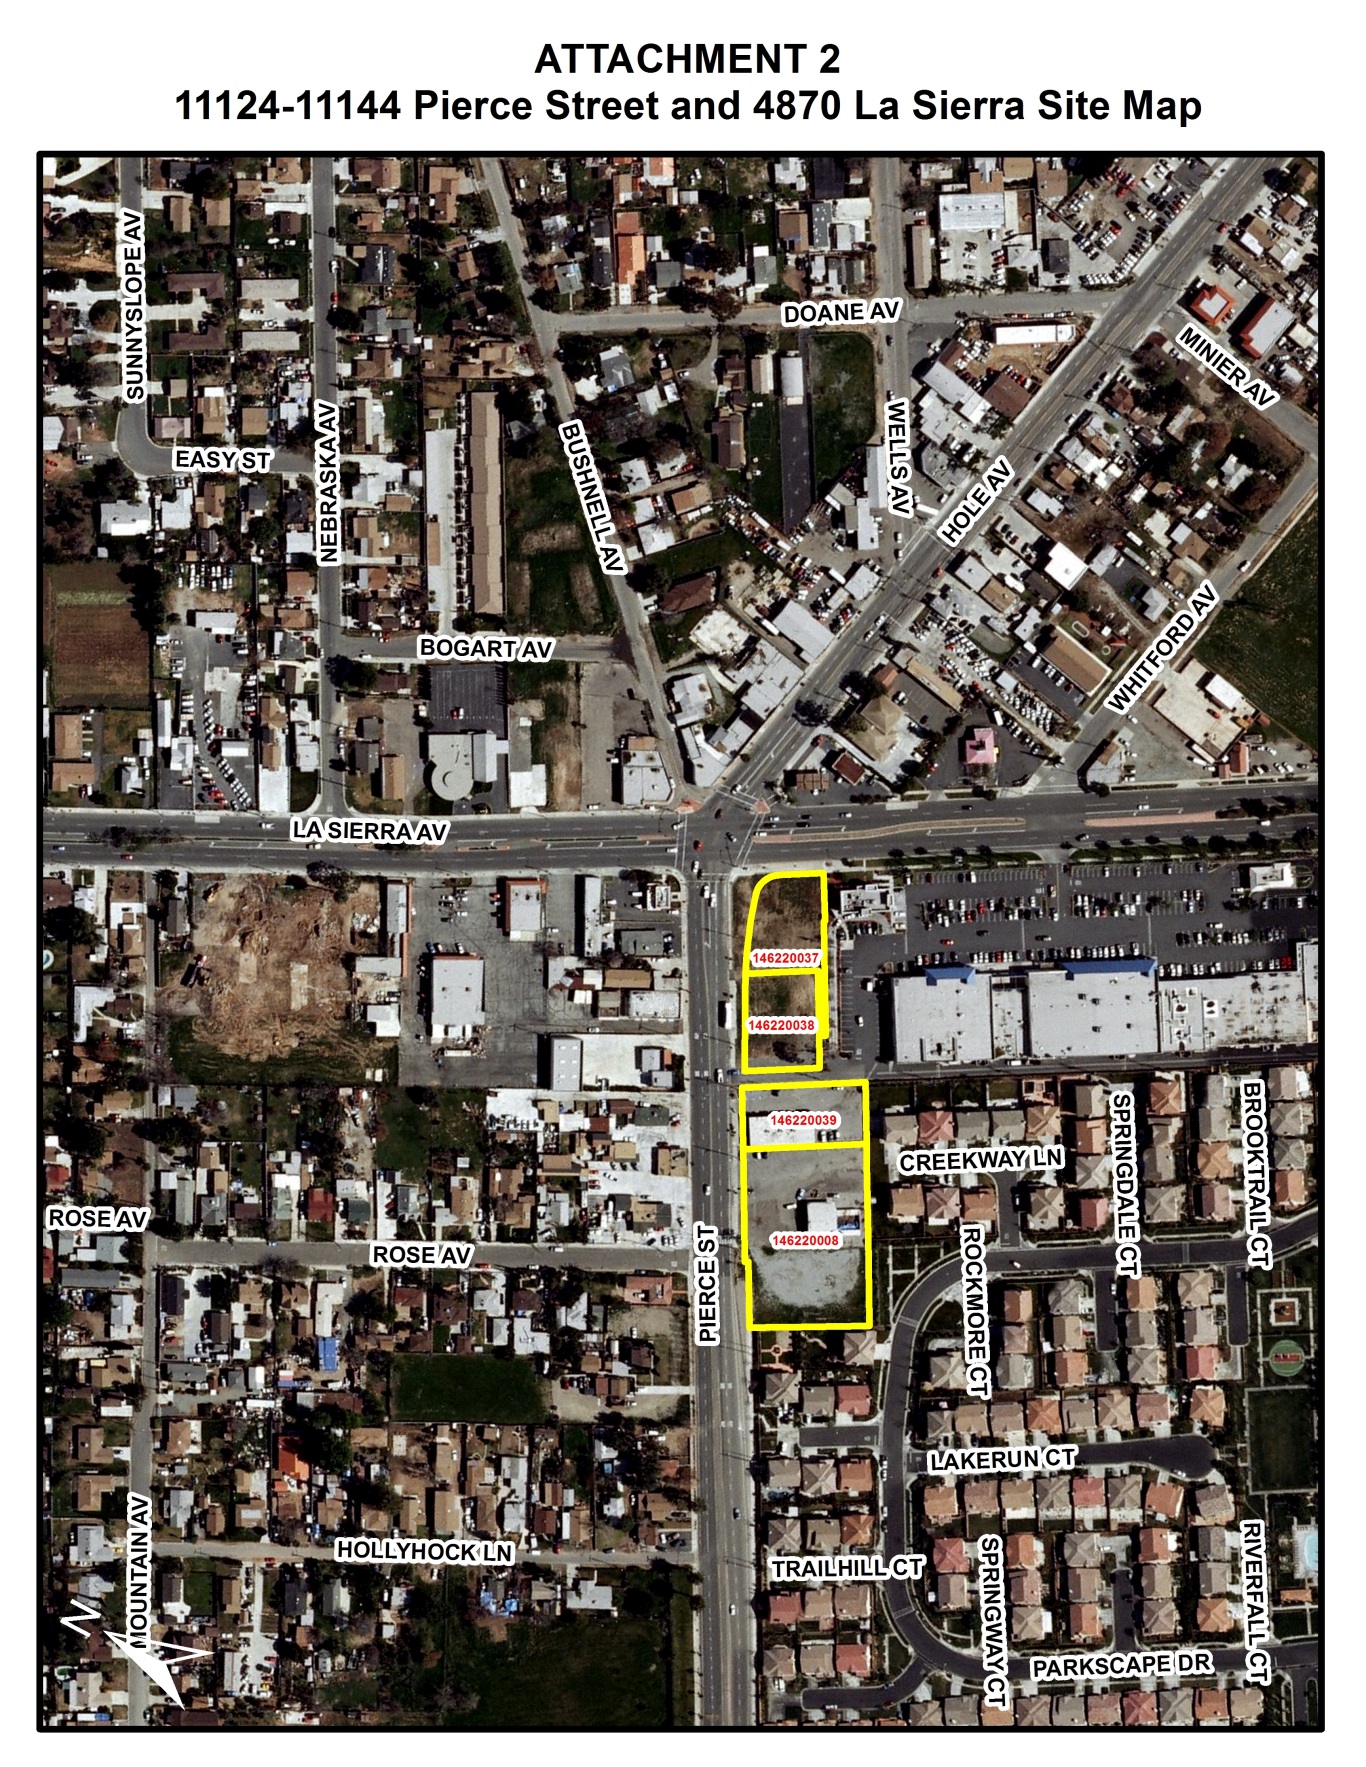 High-quality office development with a restaurant proposed for Five Points area of La Sierra